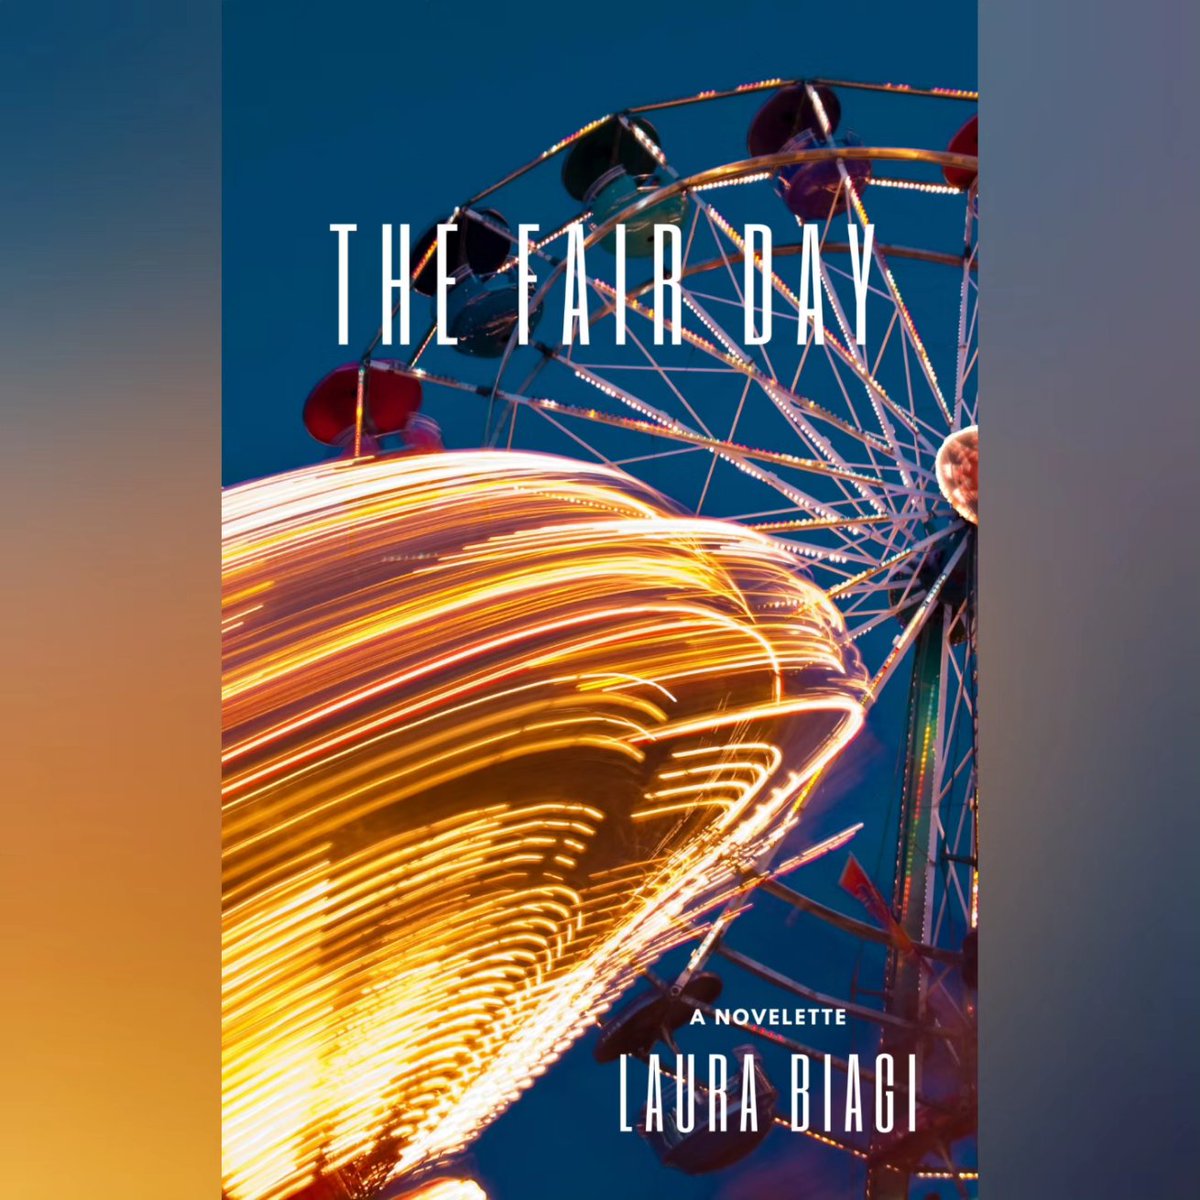 Ahhh I have a novelette chapbook out! It's about a teenager out for revenge at a county fair, plus a tornado, power, innocence, and abuse. So many thanks to @EmergeJournal for believing in this story ⚡🎡🌪️ You can read it in print or ebook below!

amazon.com/Fair-Day-Laura…